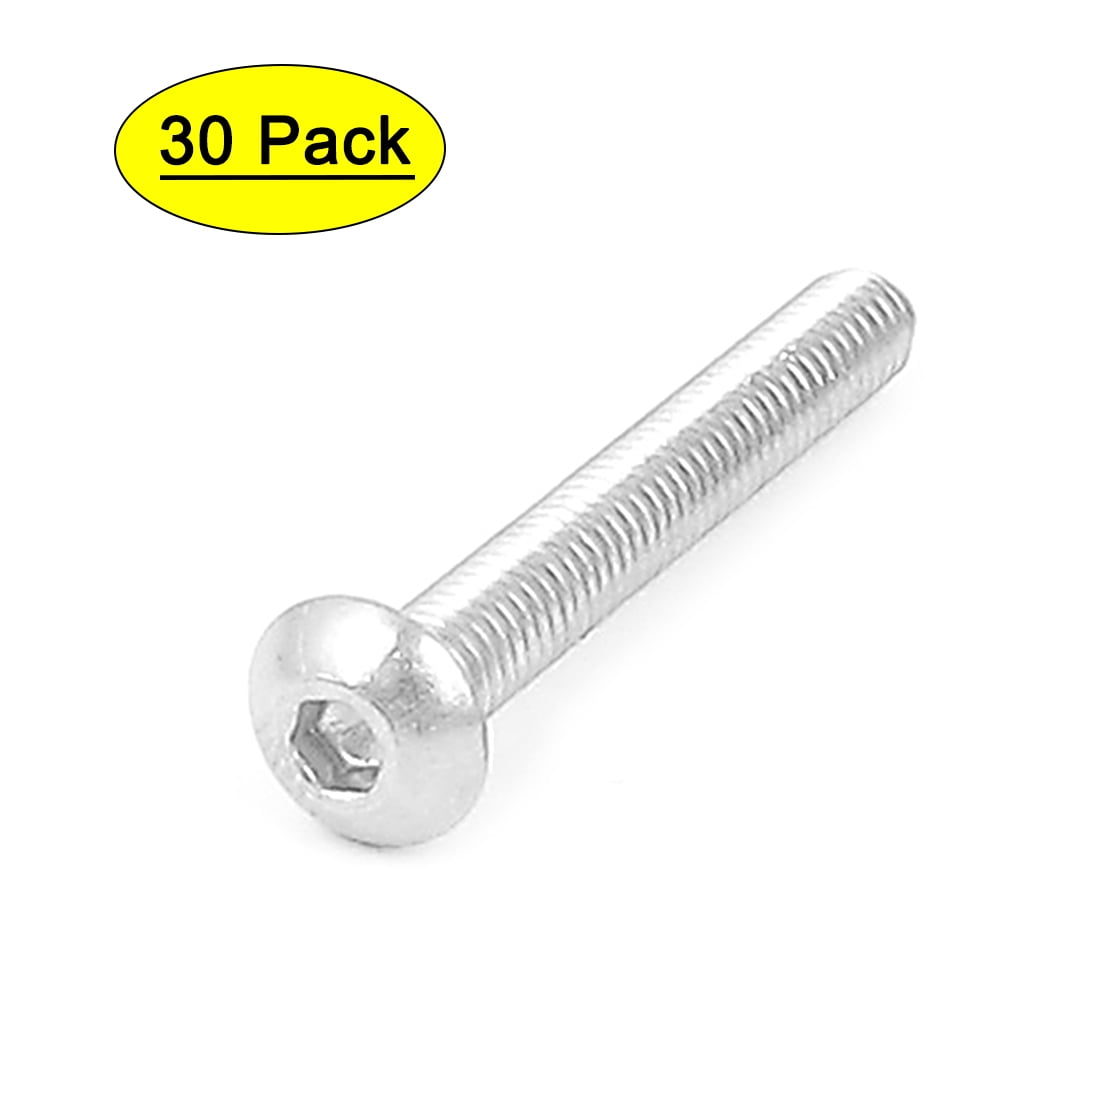 M2.5-0.45 2.5mm Metric 304 Stainless Steel  Hex Socket BUTTON HEAD Screws Bolts 